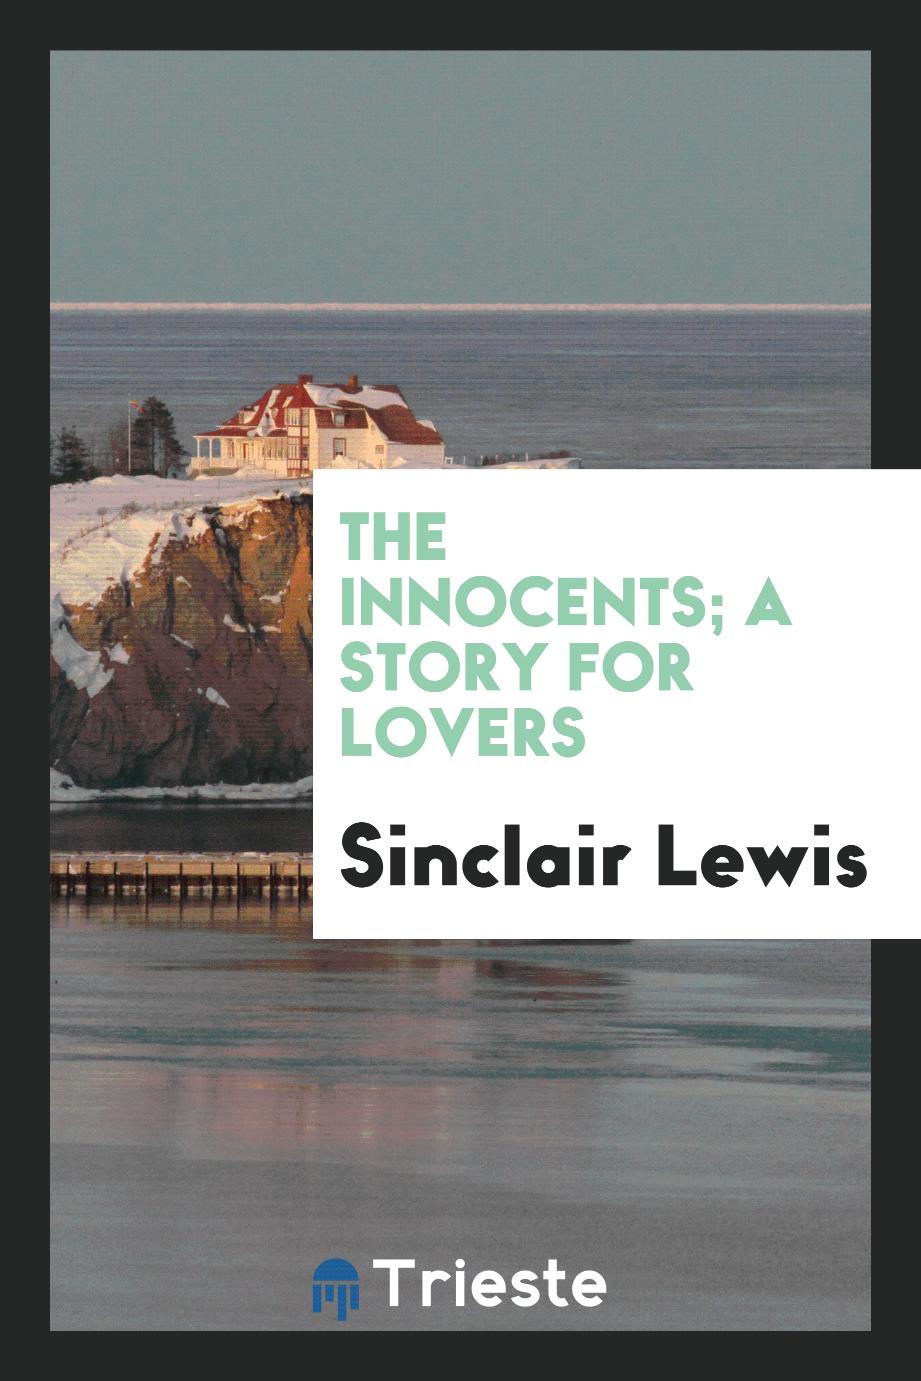 The innocents; a story for lovers